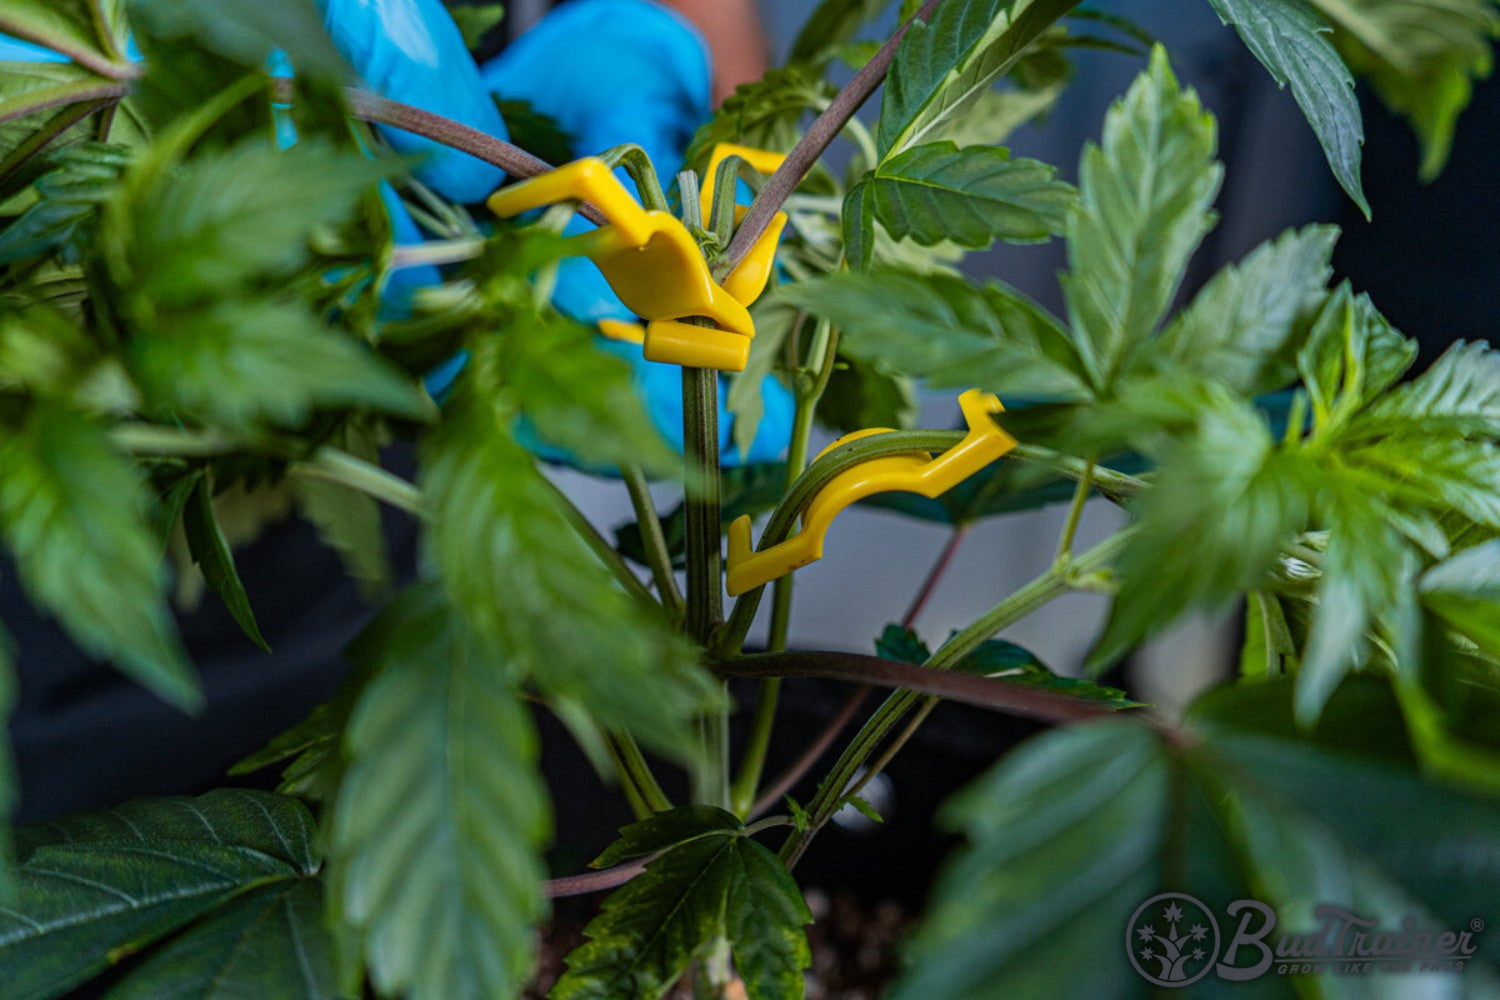 Cannabis plant branches being trained with multiple yellow BudClips, showing the branches spread and secured for optimal growth, with the BudTrainer logo in the bottom right corner.